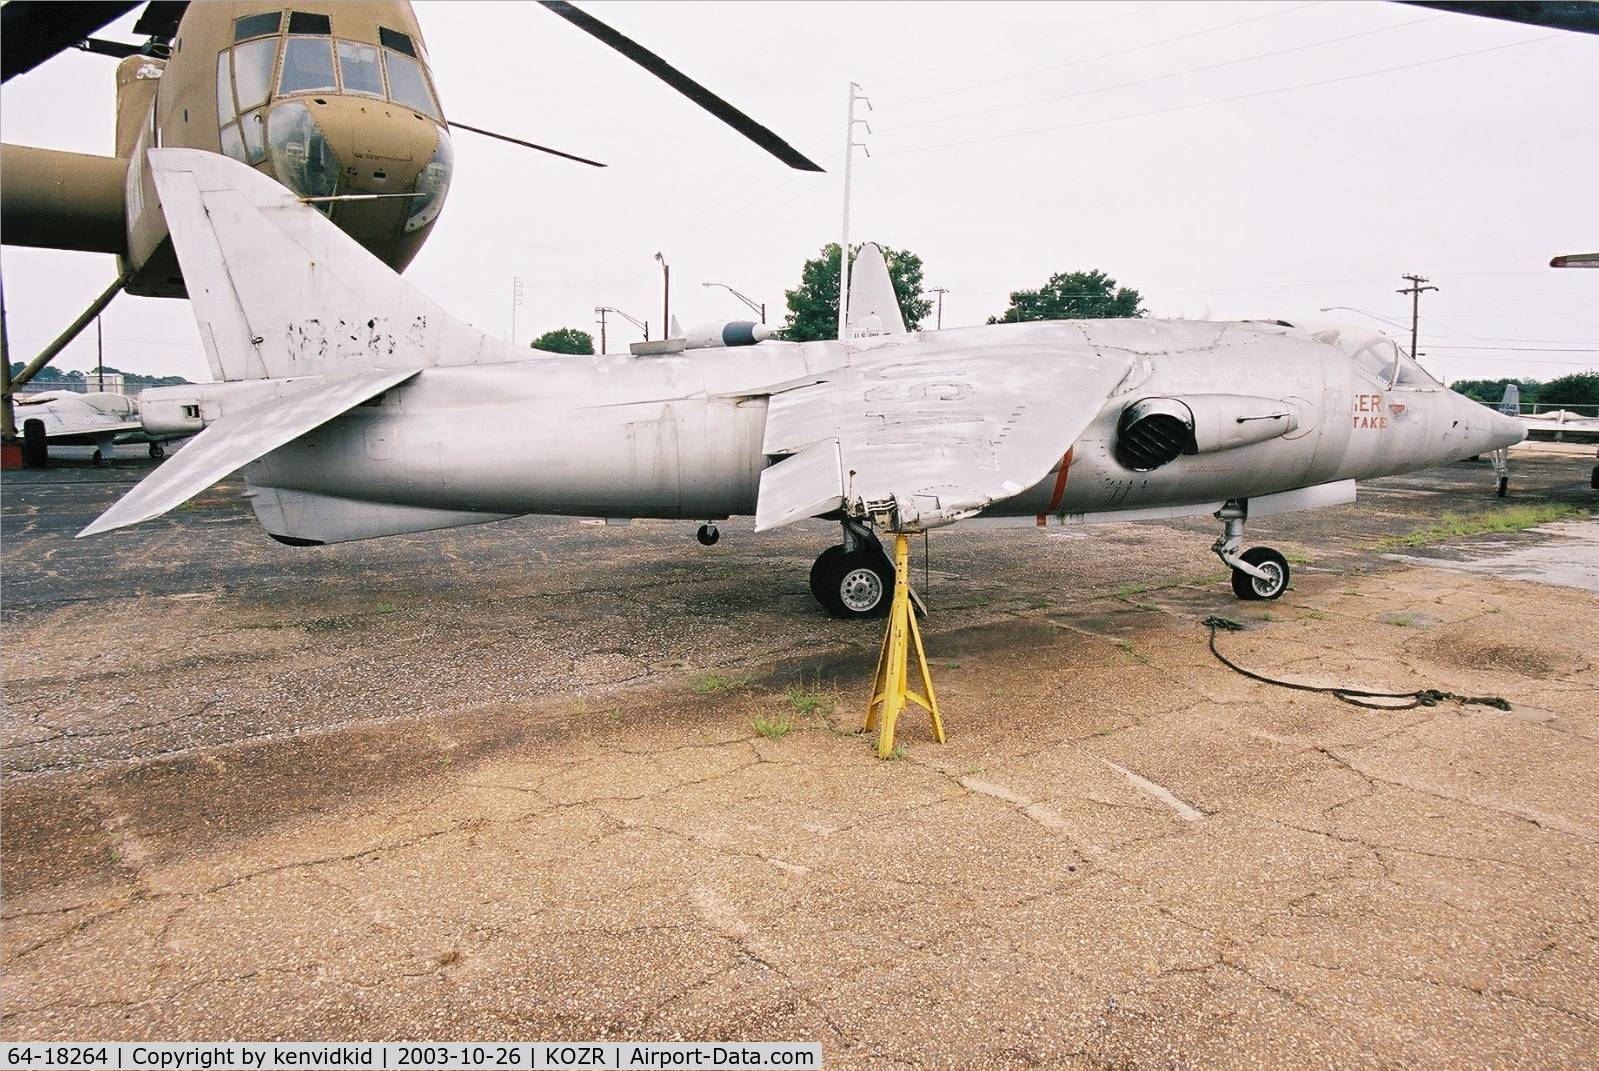 64-18264, 1964 Hawker Siddeley XV-6A Kestrel C/N Not found XS690/64-18264, At the Fort Rucker Museum storage compound.